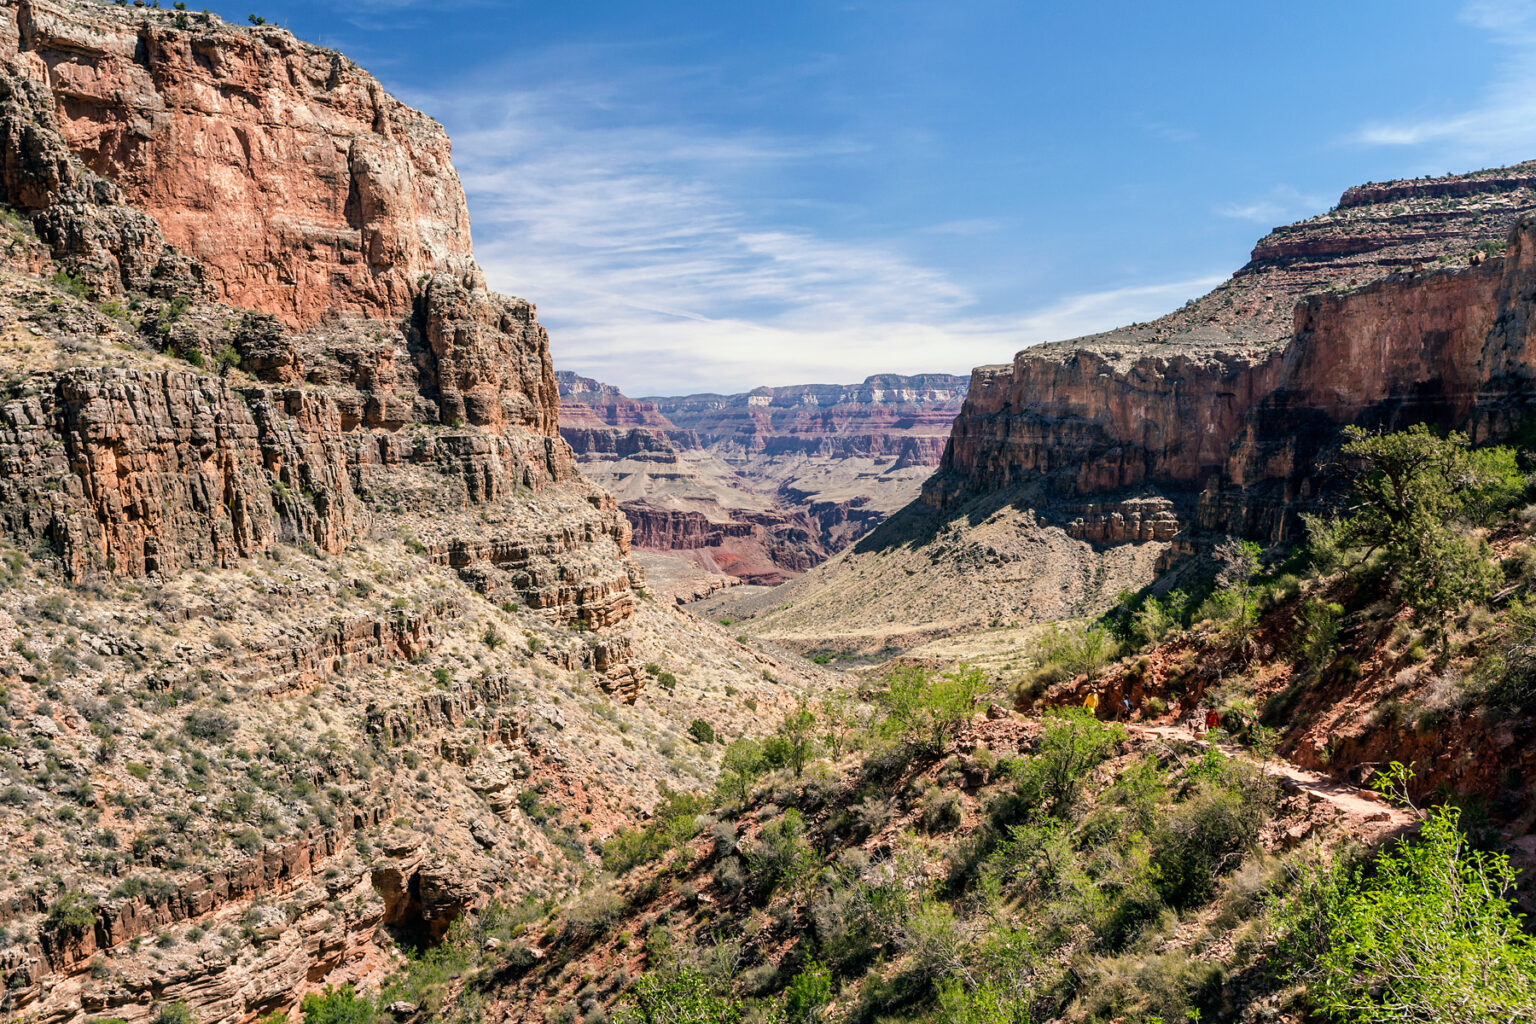 View of Bright Angel Trail as it descends into Grand Canyon